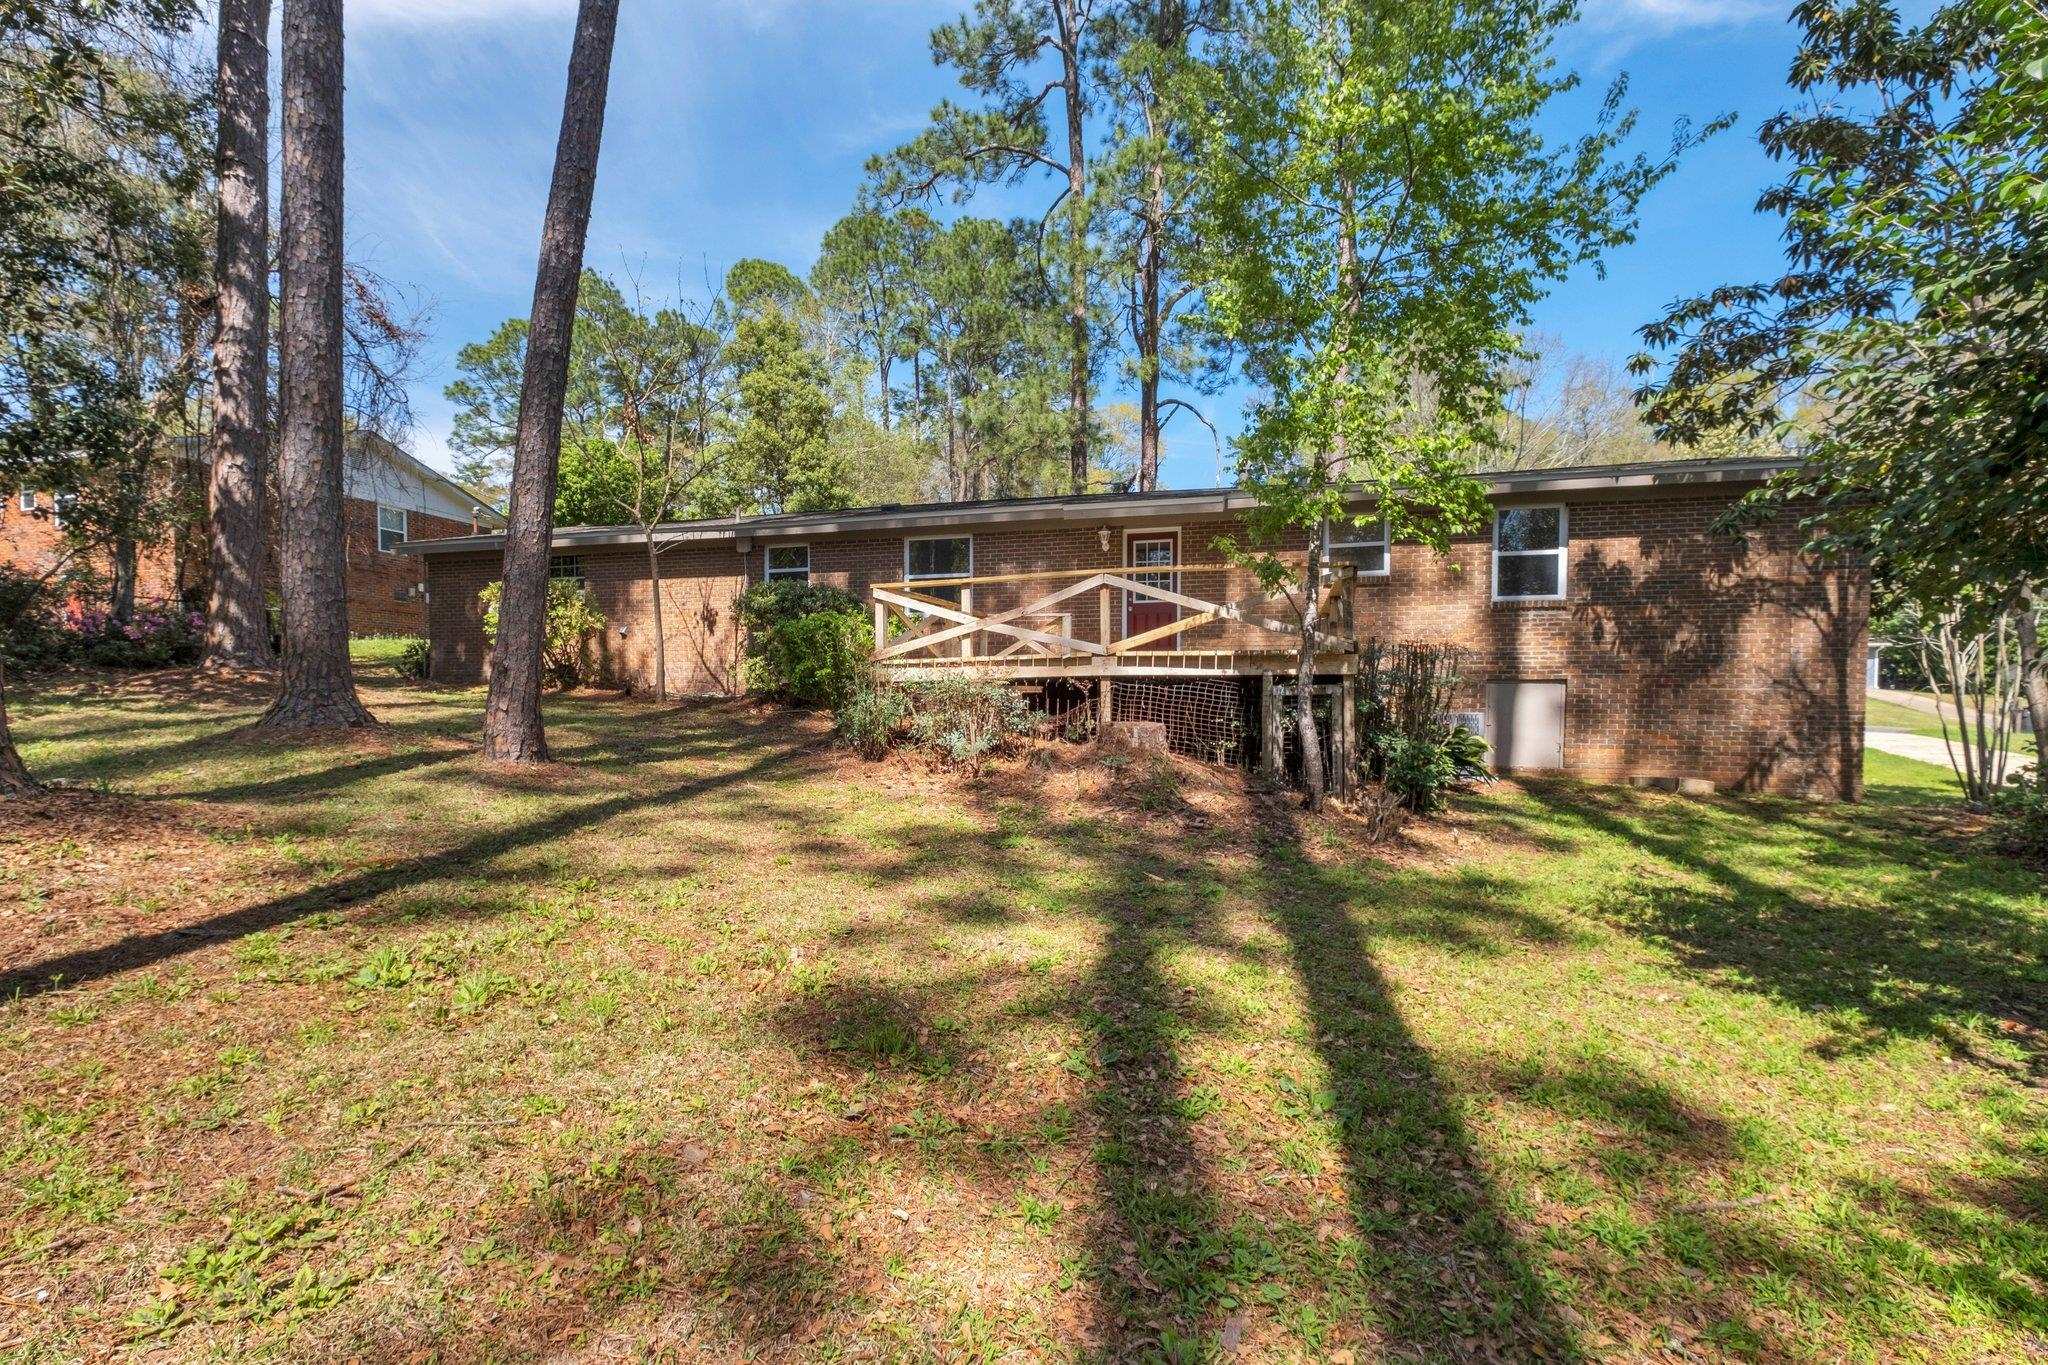 917 Abbiegail Drive,TALLAHASSEE,Florida 32303,3 Bedrooms Bedrooms,2 BathroomsBathrooms,Detached single family,917 Abbiegail Drive,369523